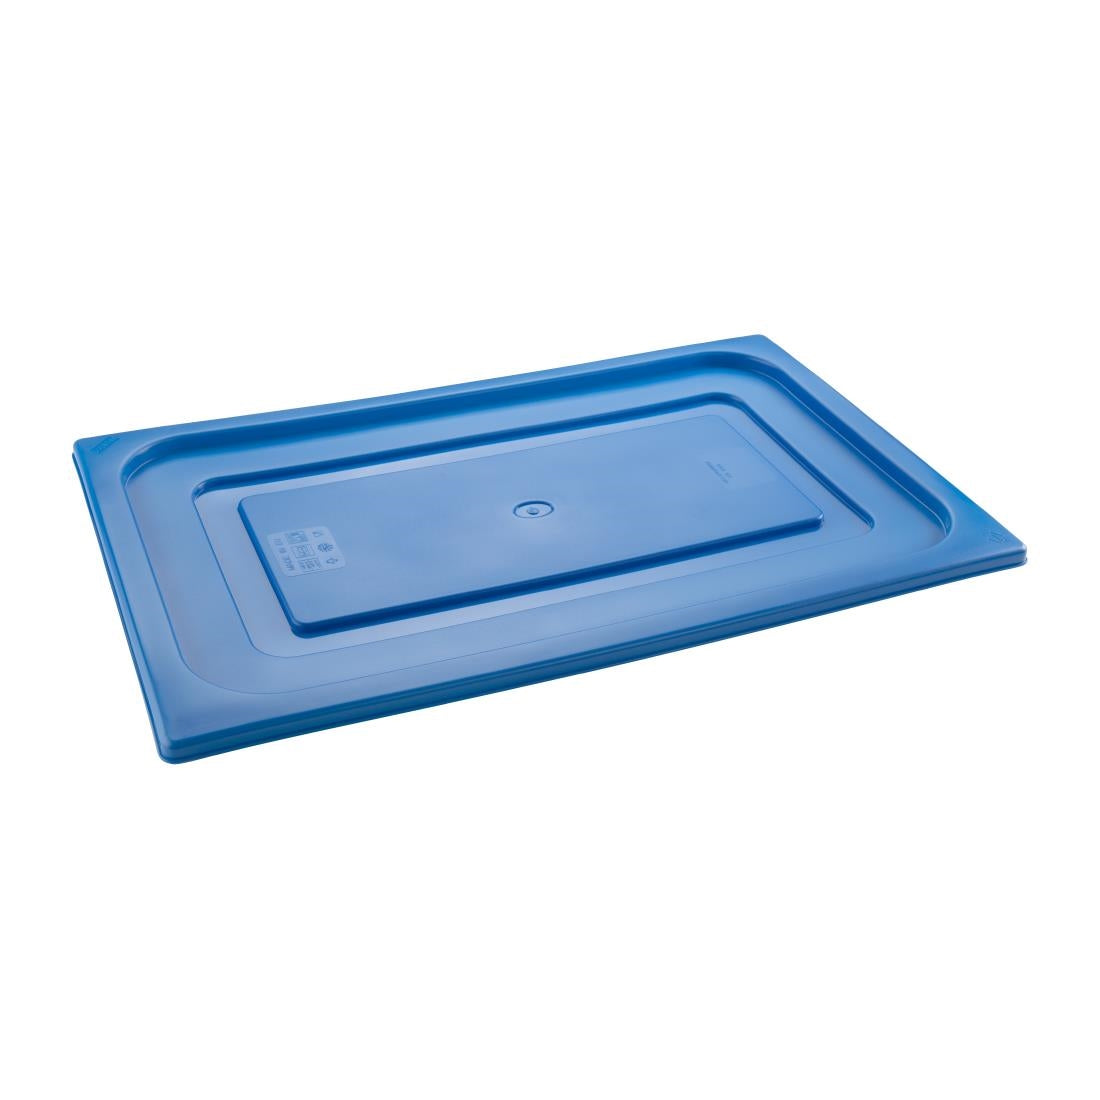 HT894 Pujadas Blue Polinorm Gastronorm Lid 1/1GN